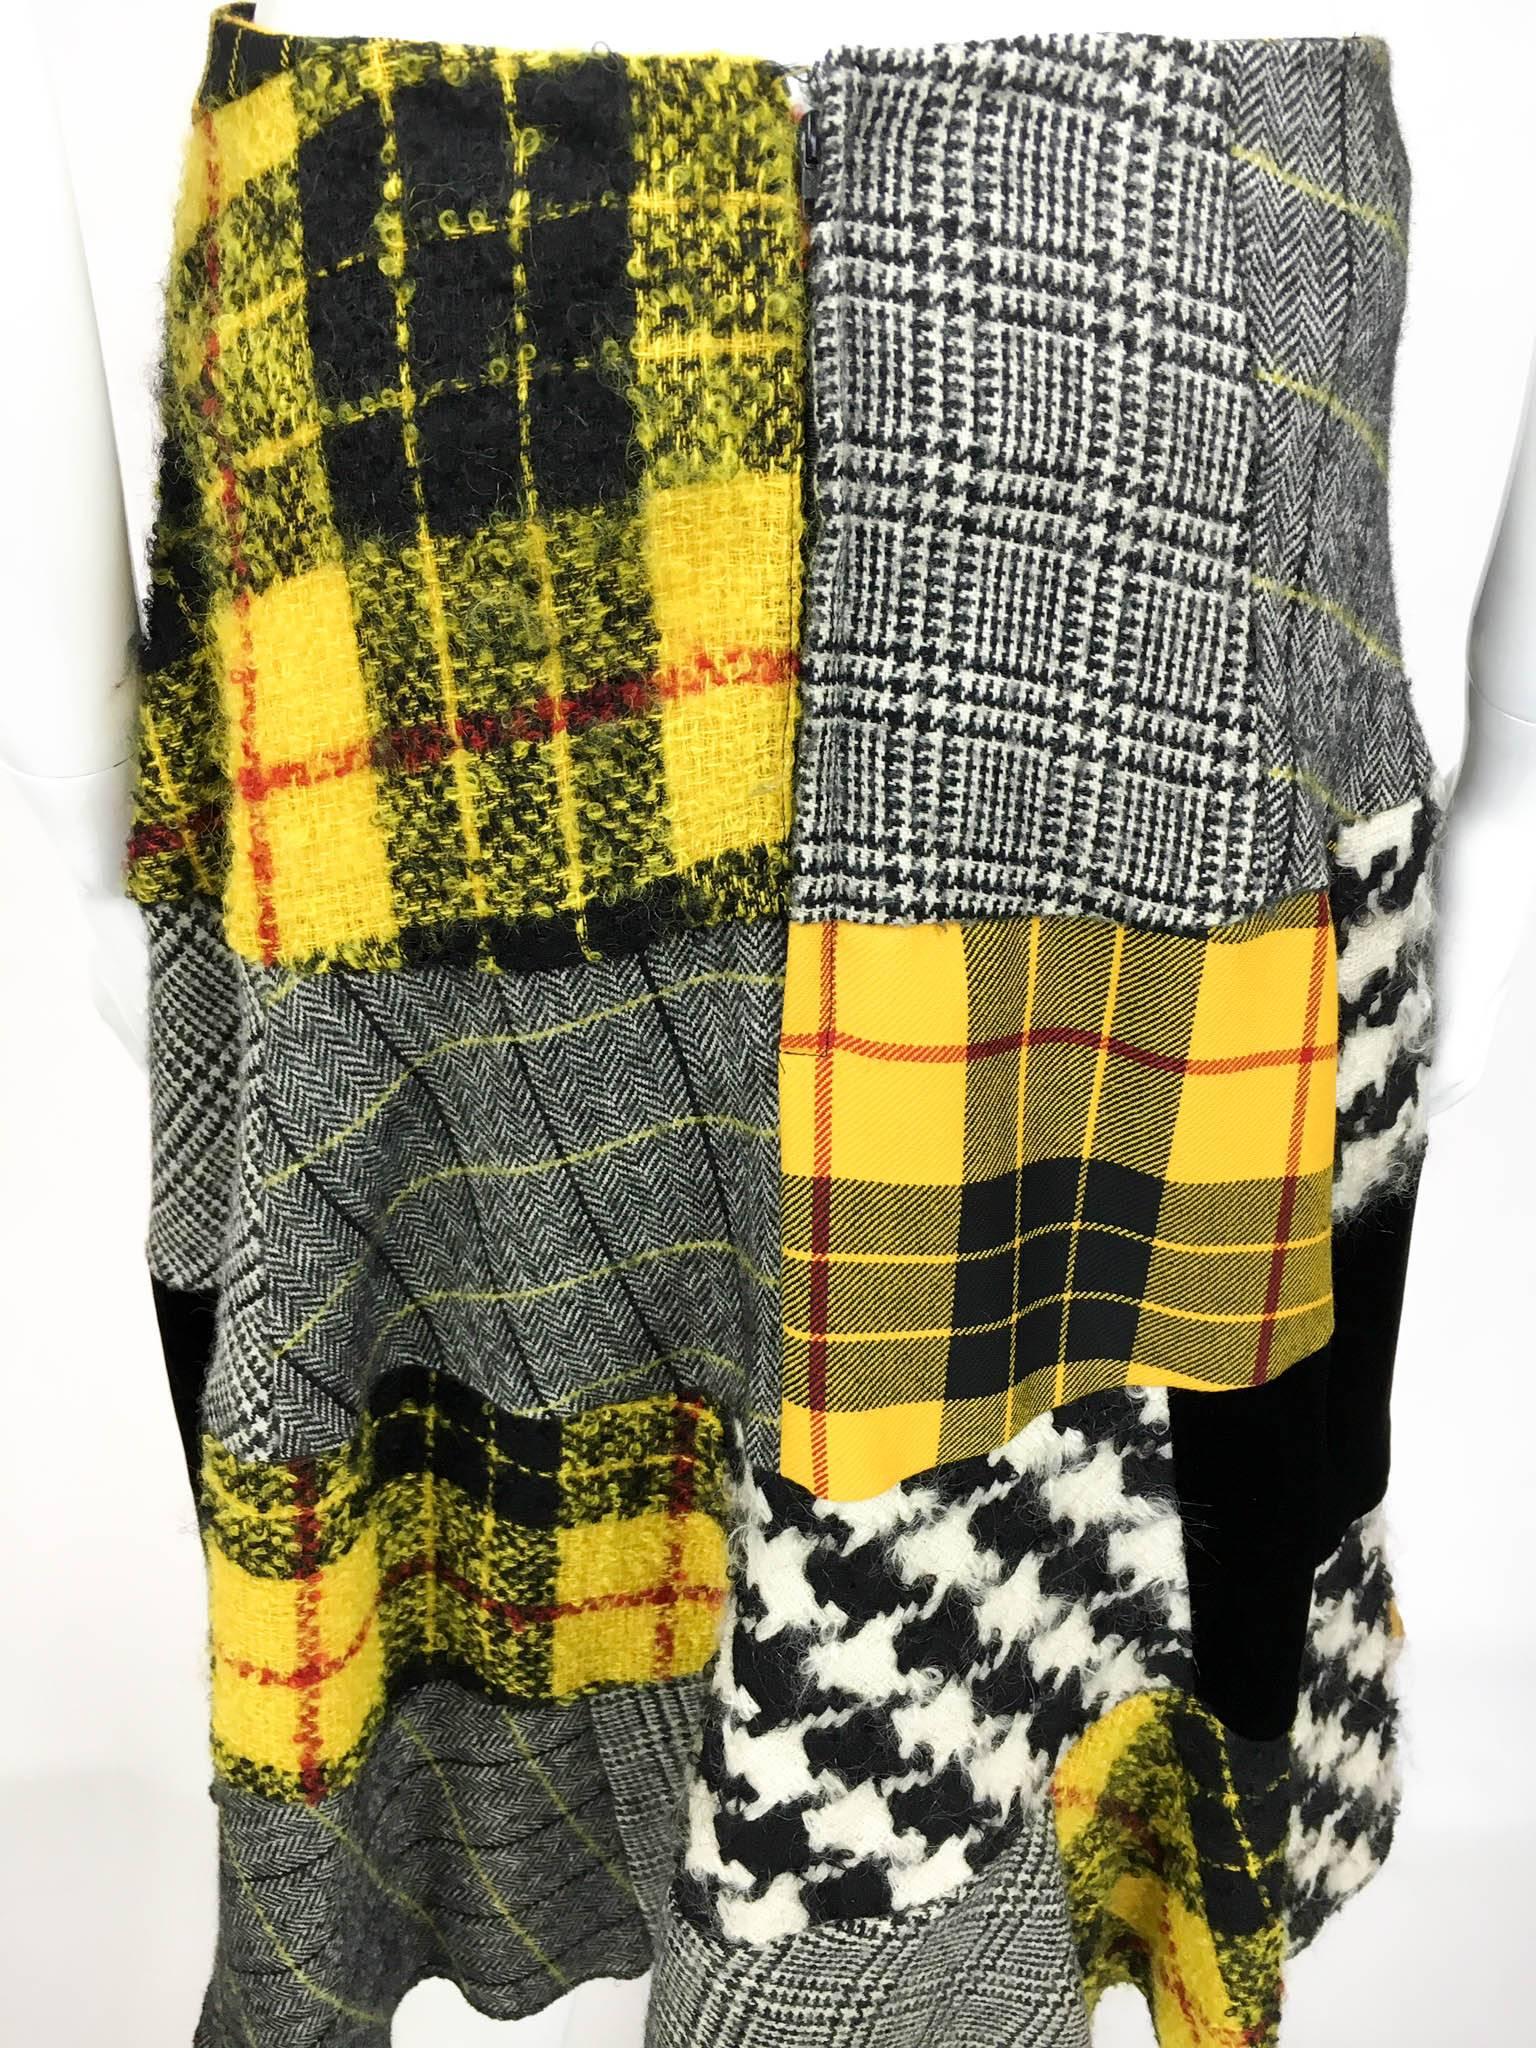 Comme des Garcons Patchwork Asymmetric Skirt - Early 1990s 4